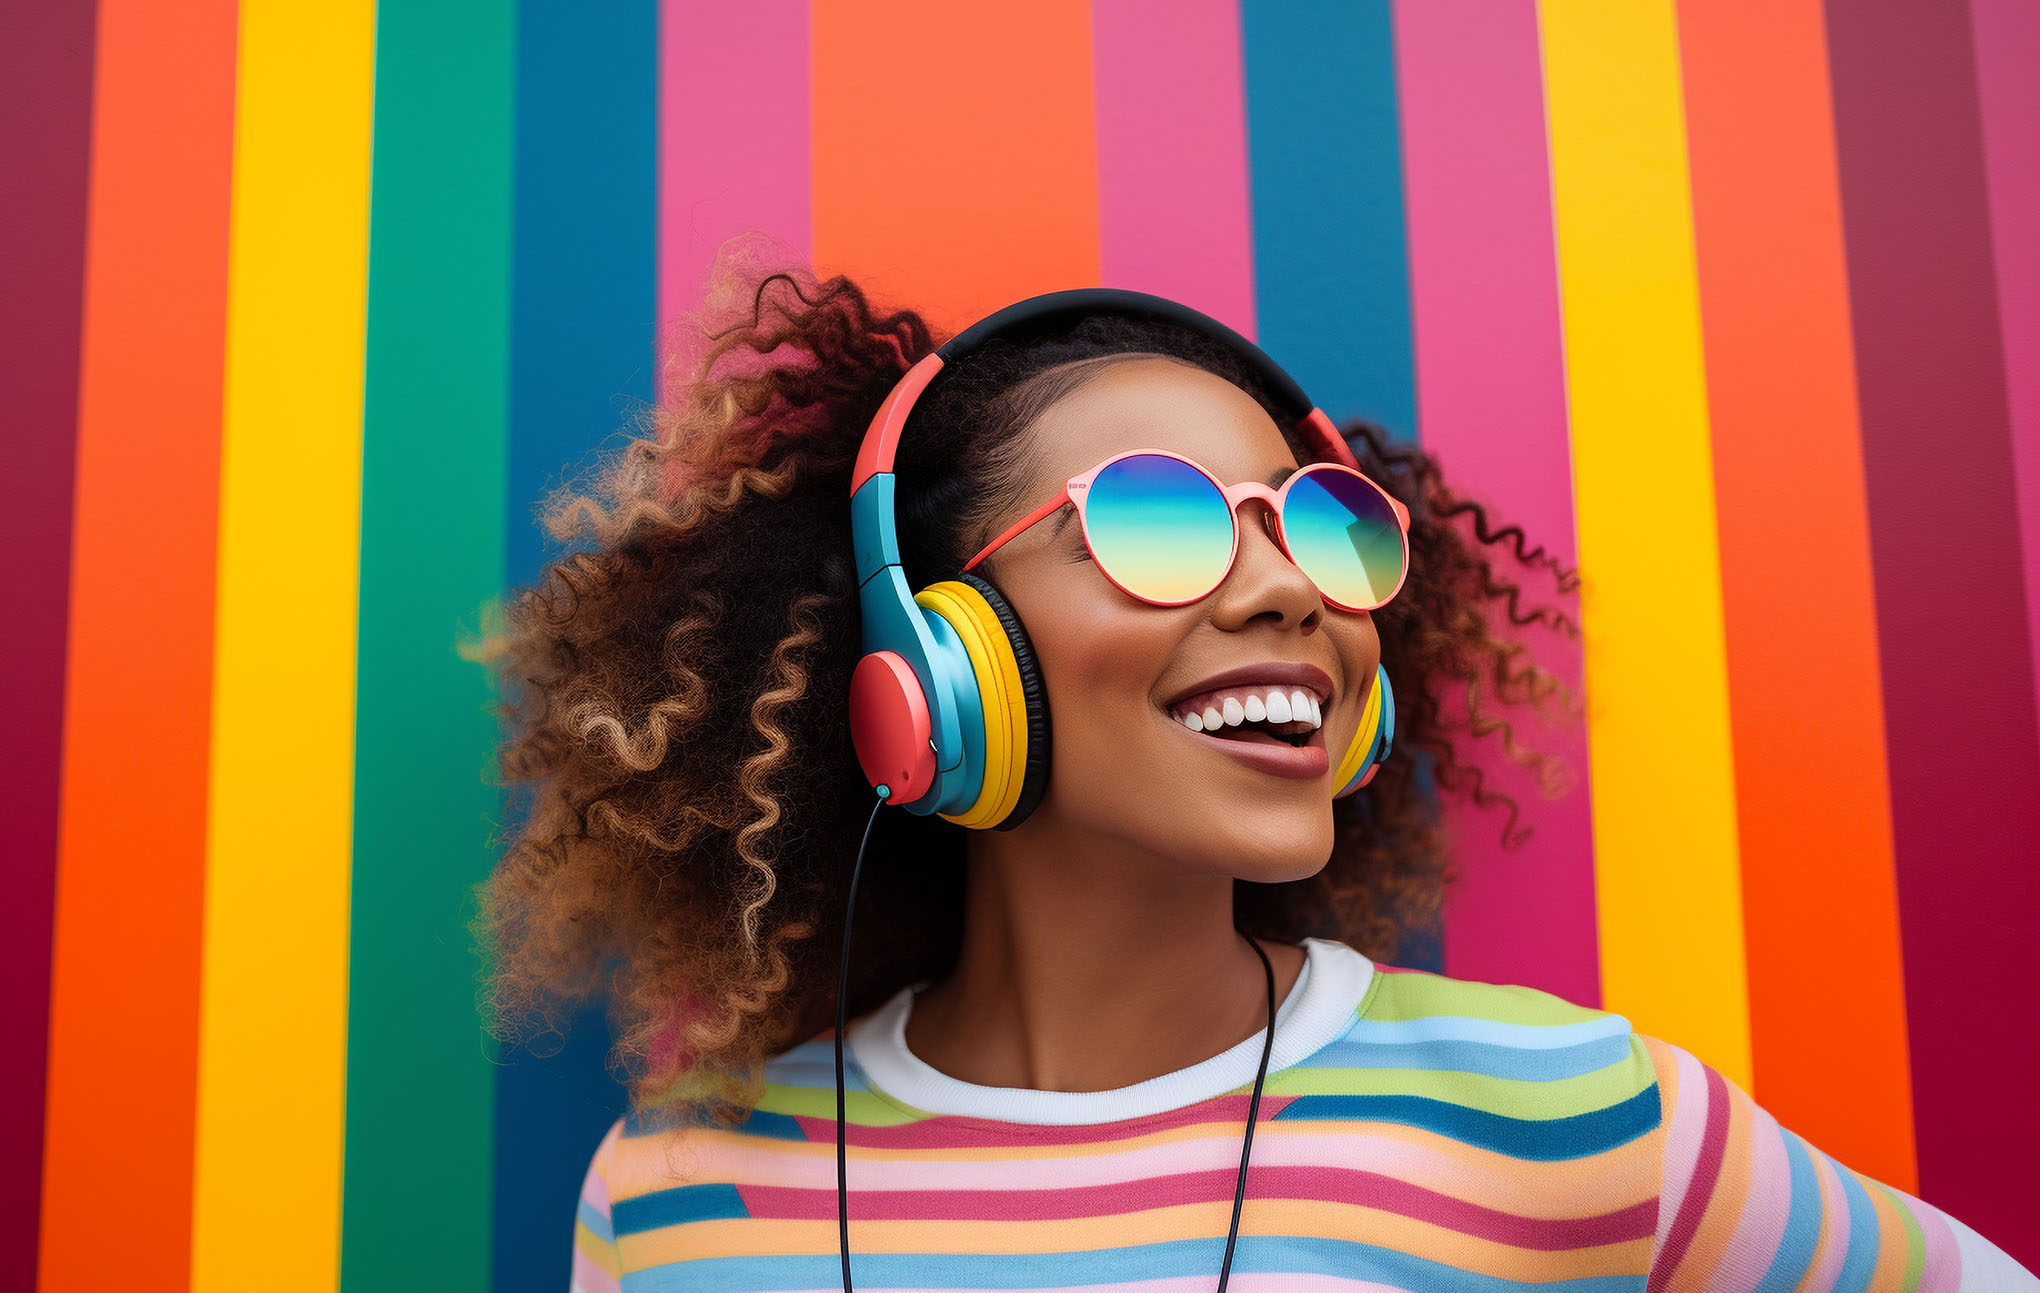 A joyful woman with curly hair wearing colorful headphones and sunglasses smiles broadly against a vibrant multicolored striped background, reflecting bold lines of pink, blue, green, and yellow.